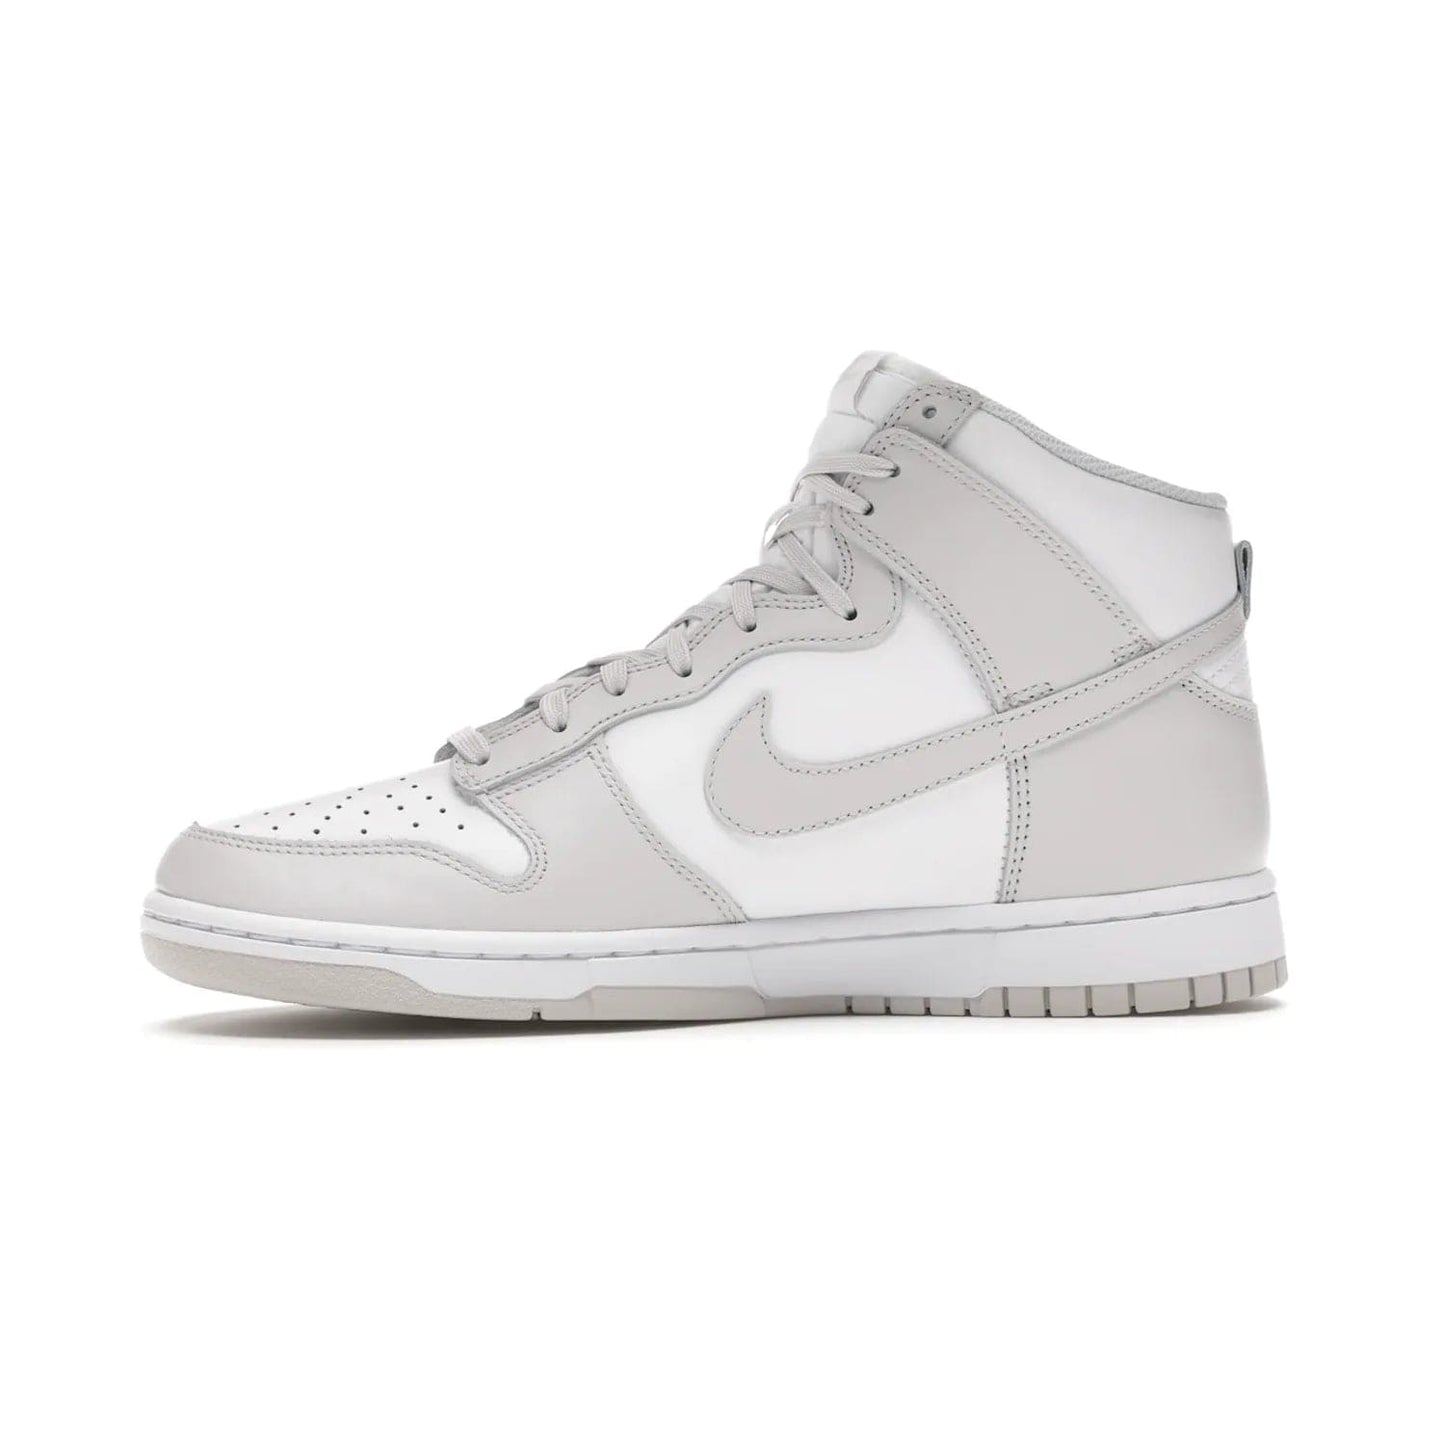 Nike Dunk High Retro White Vast Grey (2021) - Image 18 - Only at www.BallersClubKickz.com - Nike Dunk High Retro White Vast Grey 2021: classic '80s basketball sneaker with a crisp white base, grey overlays, midsole tooling and outsole. Dropped Feb. 2021.